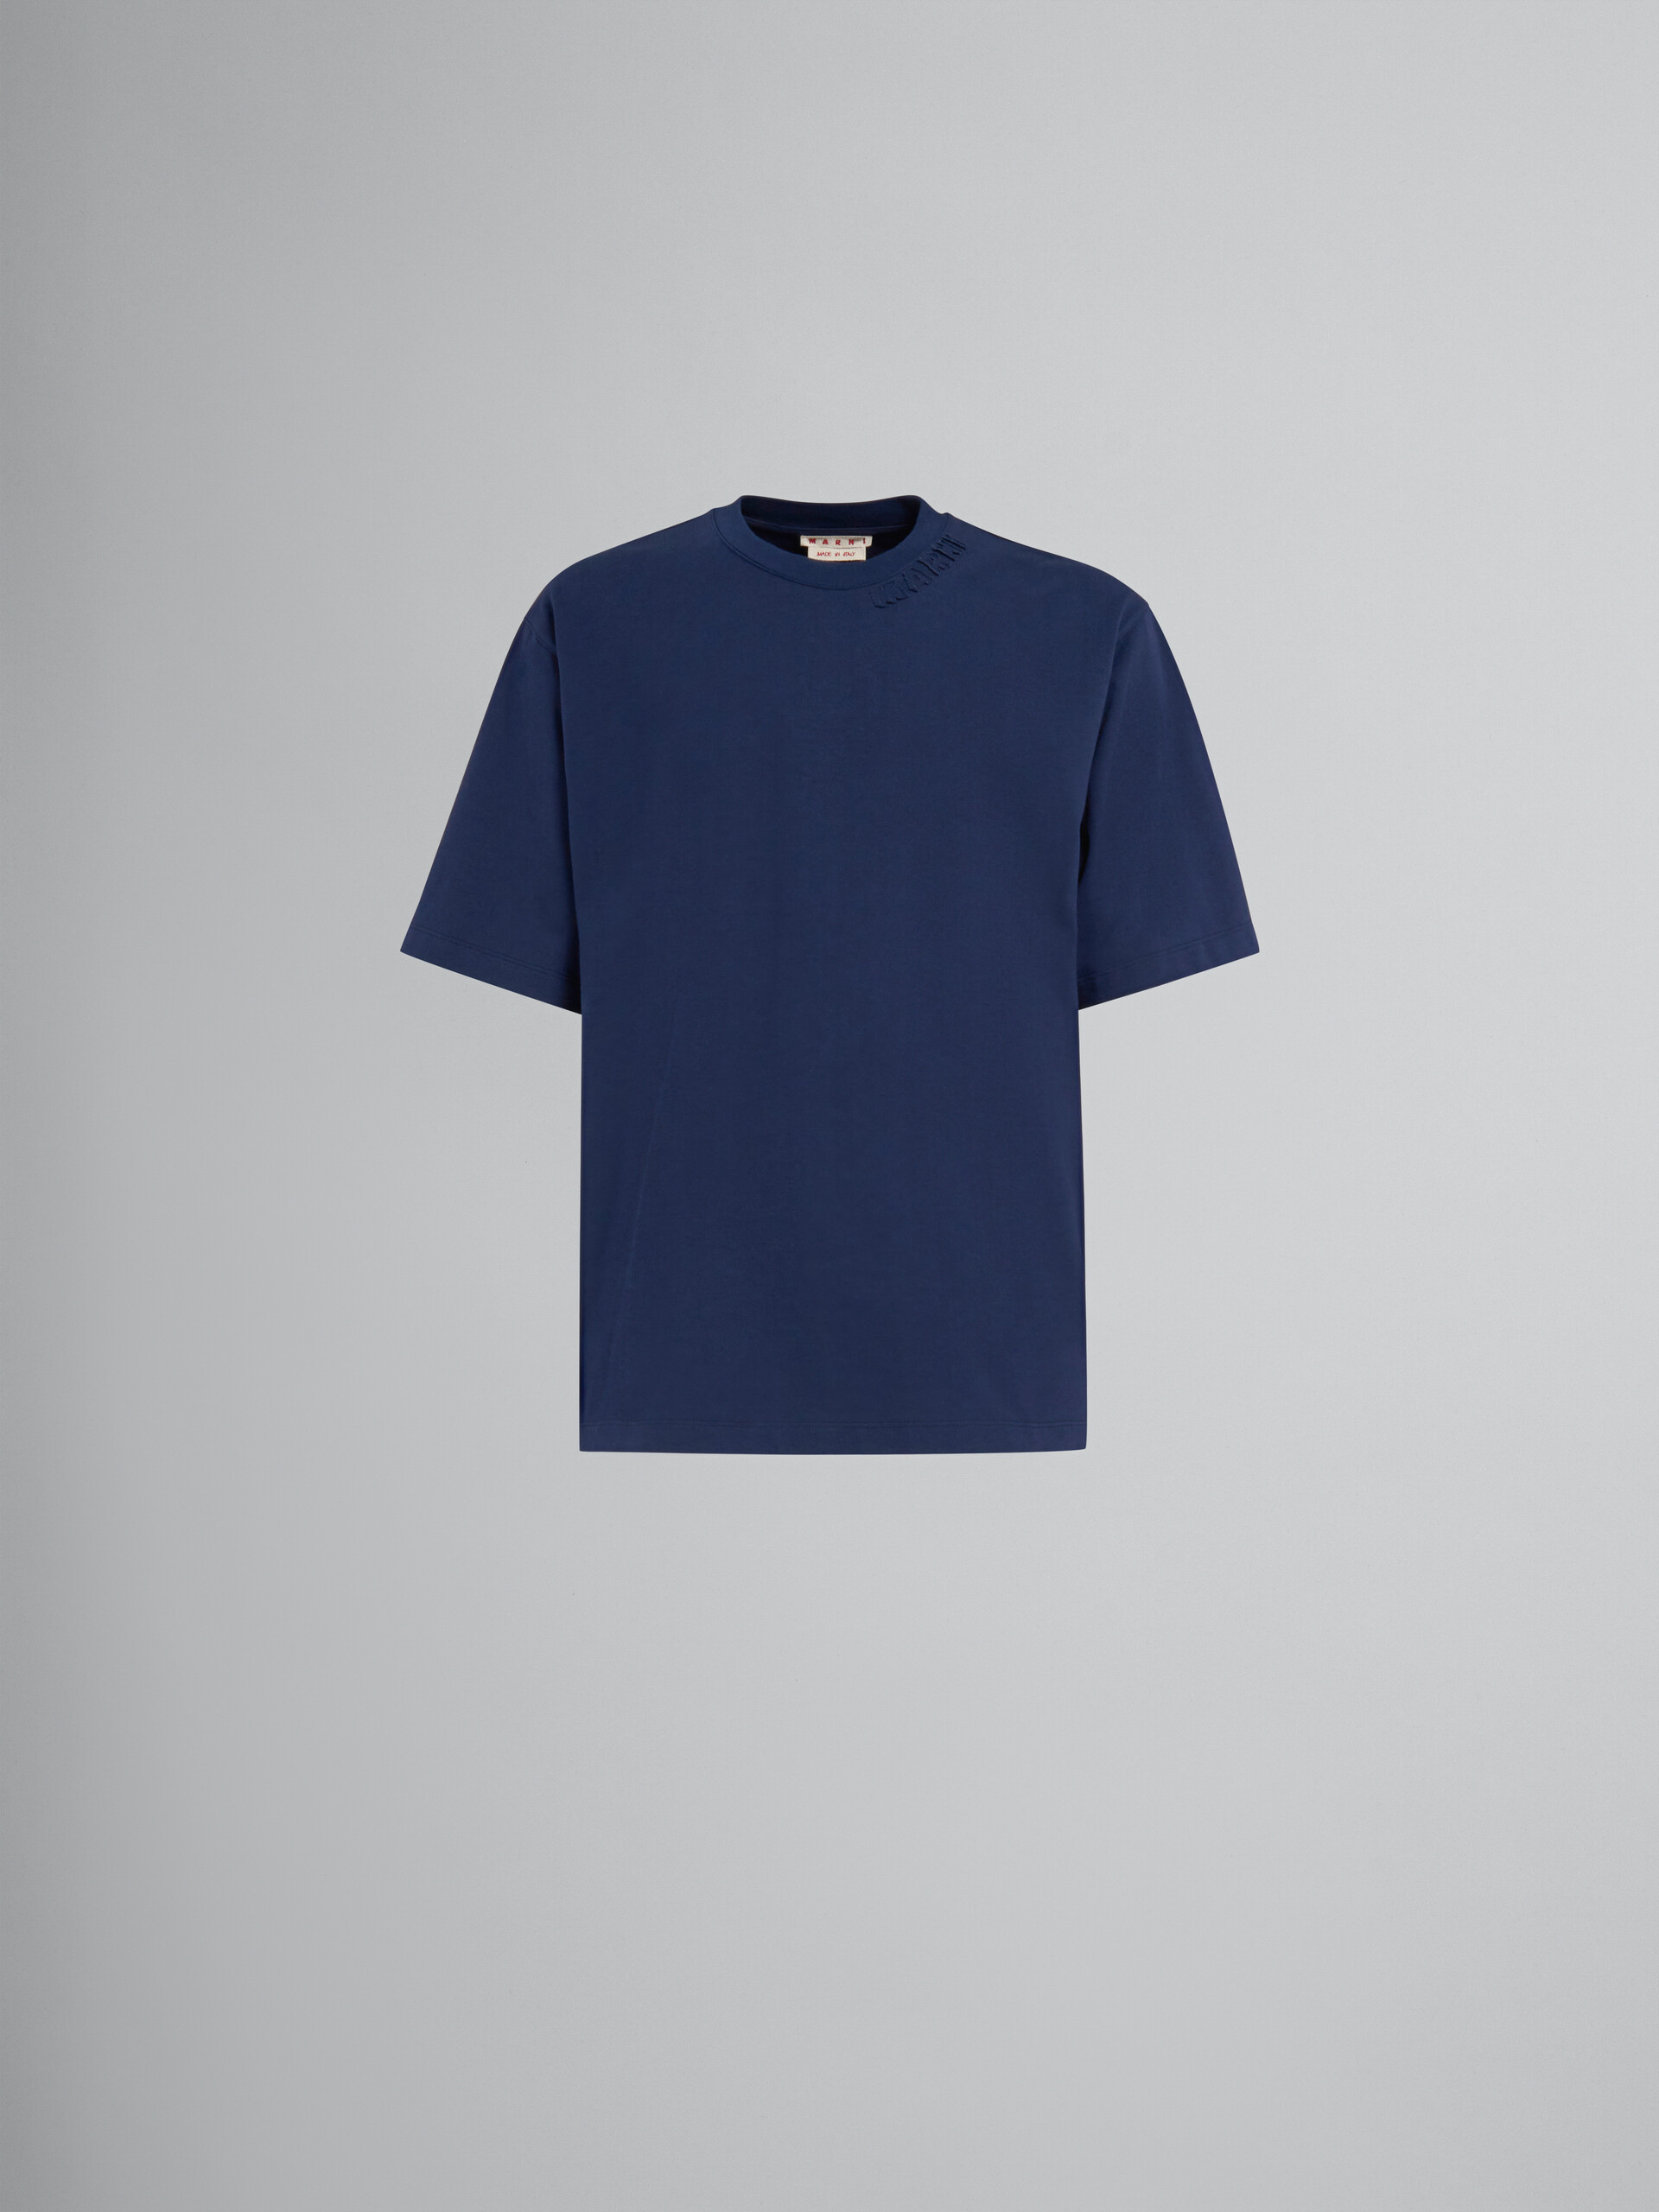 Blue organic cotton oversized T-shirt with Marni patches - T-shirts - Image 1